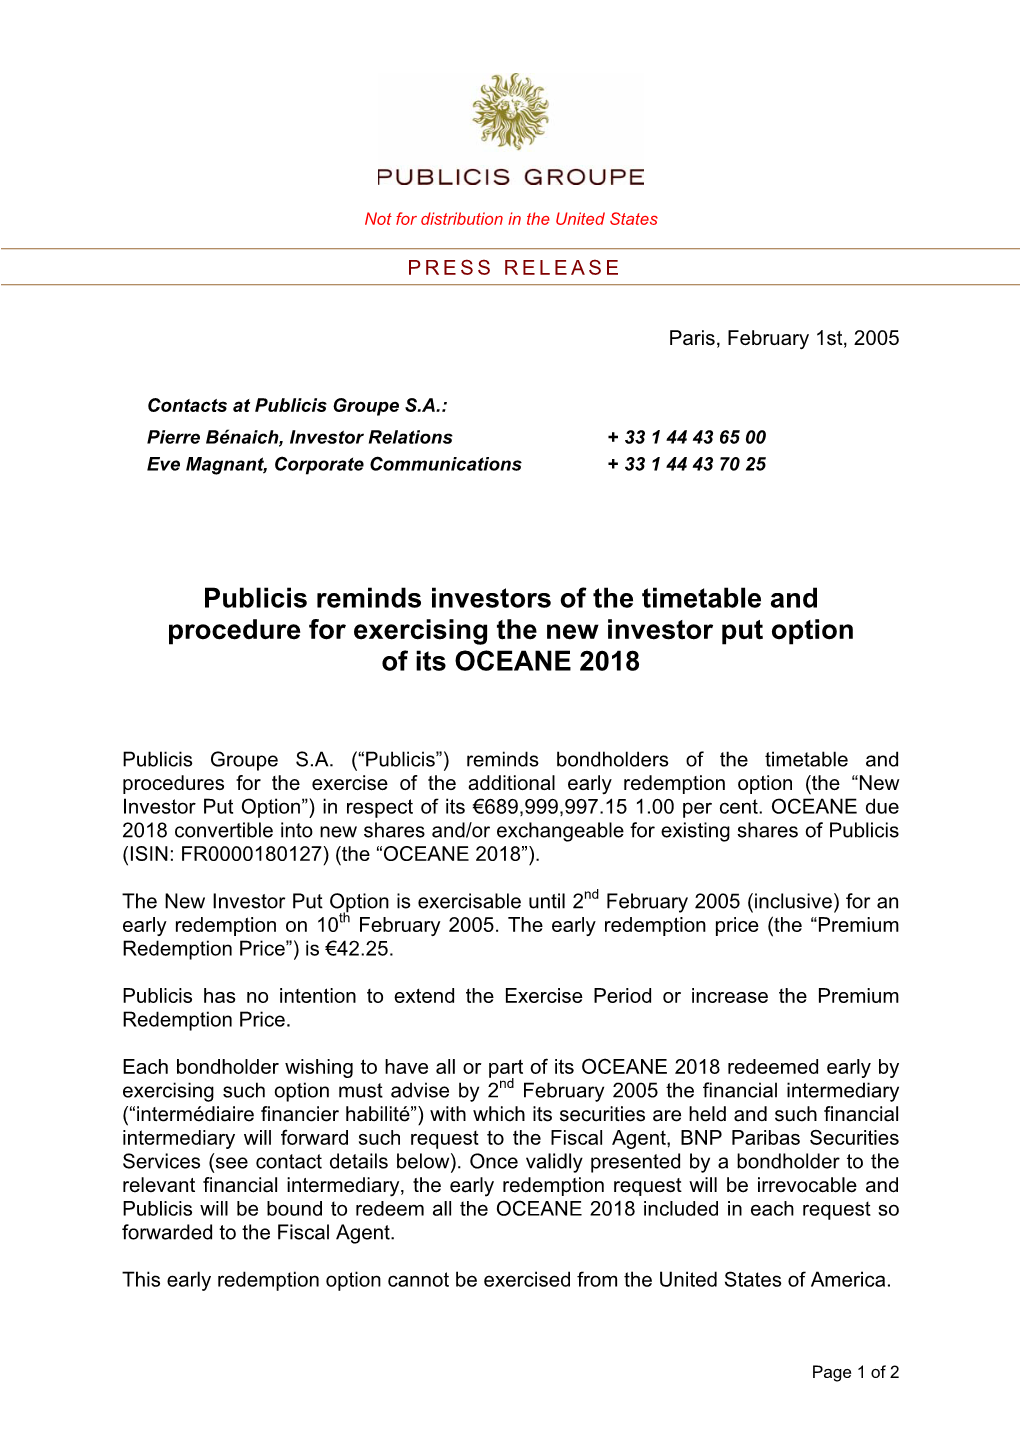 Publicis Reminds Investors of the Timetable and Procedure for Exercising the New Investor Put Option of Its OCEANE 2018